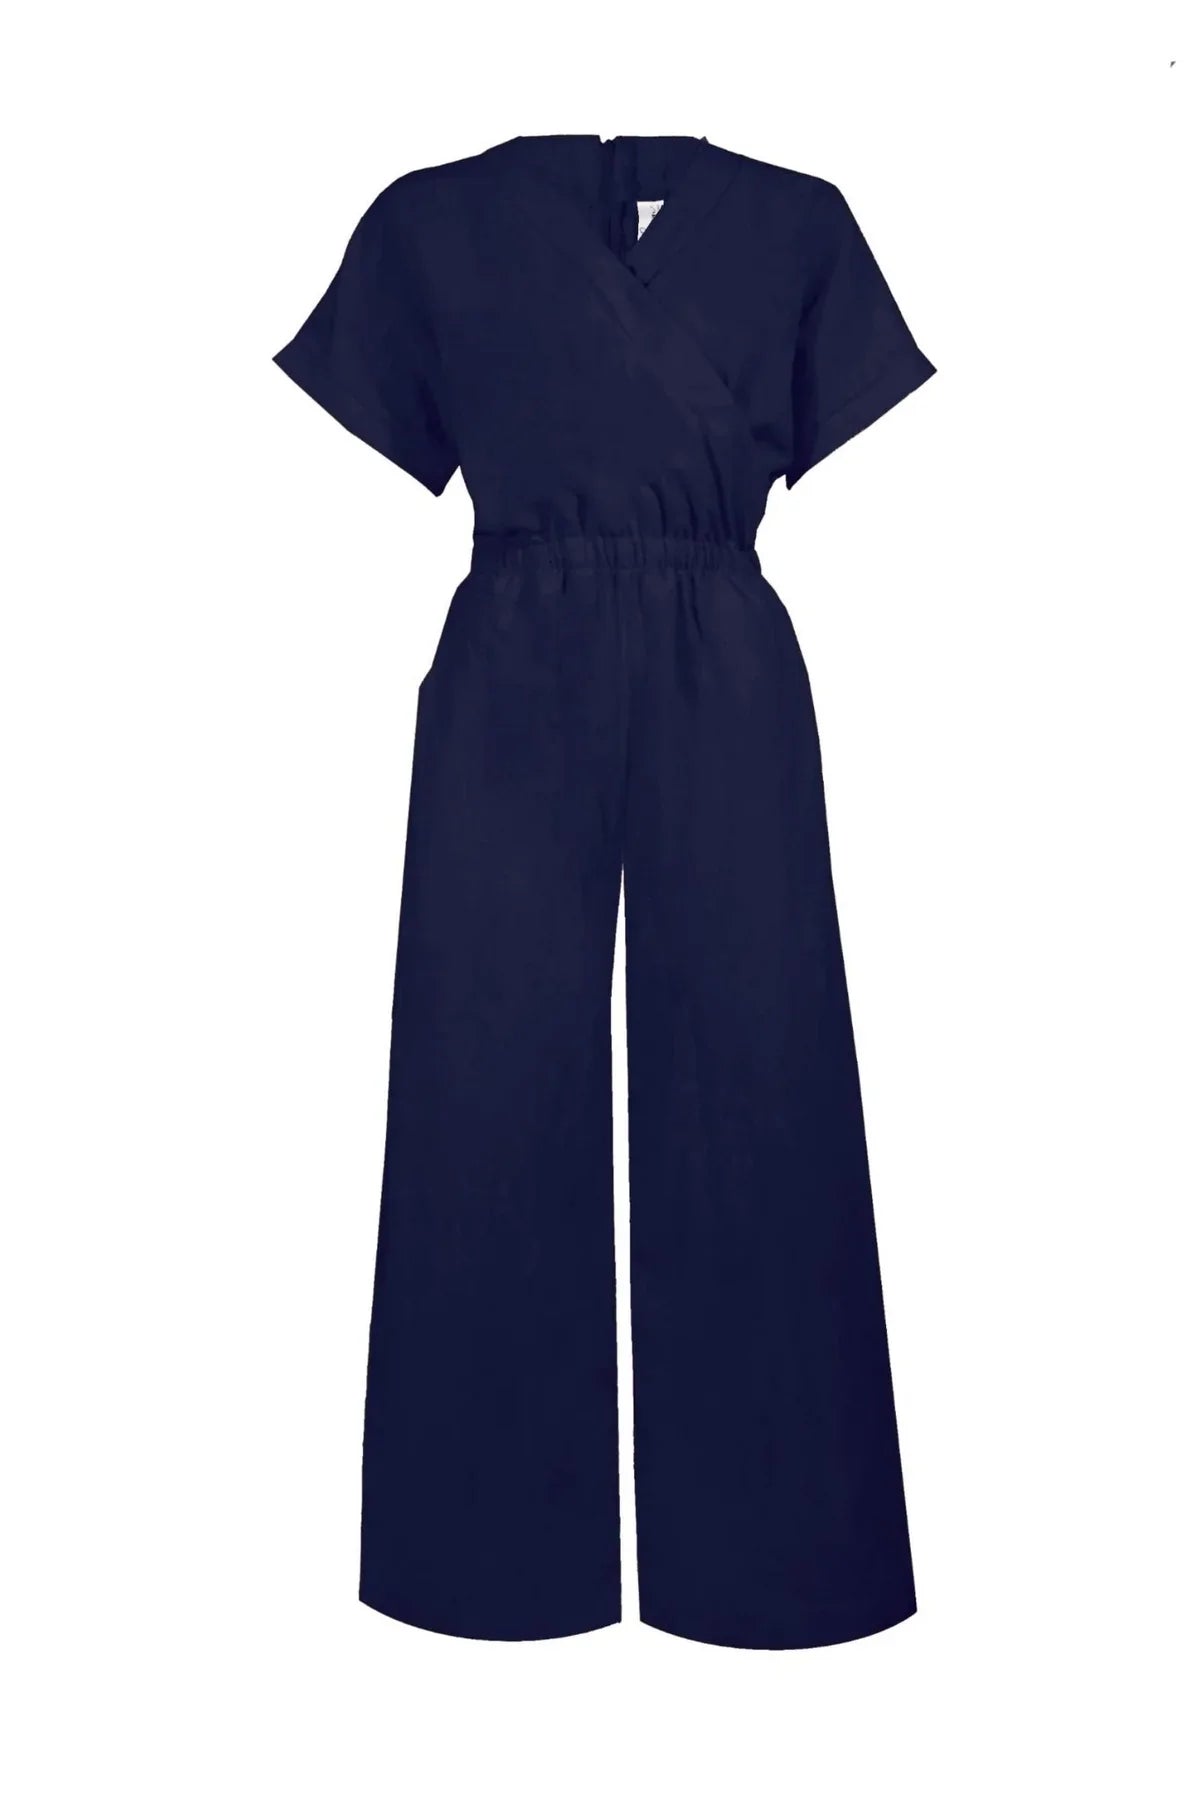 Elka Jumpsuit by Melow, Midnight, short sleeves, faux-wrap front, elastic waist, capri length, wide legs, side pockets, eco-fabric, OEKO-TEX certified, viscose, linen, sizes XS to XXL, made in Montreal